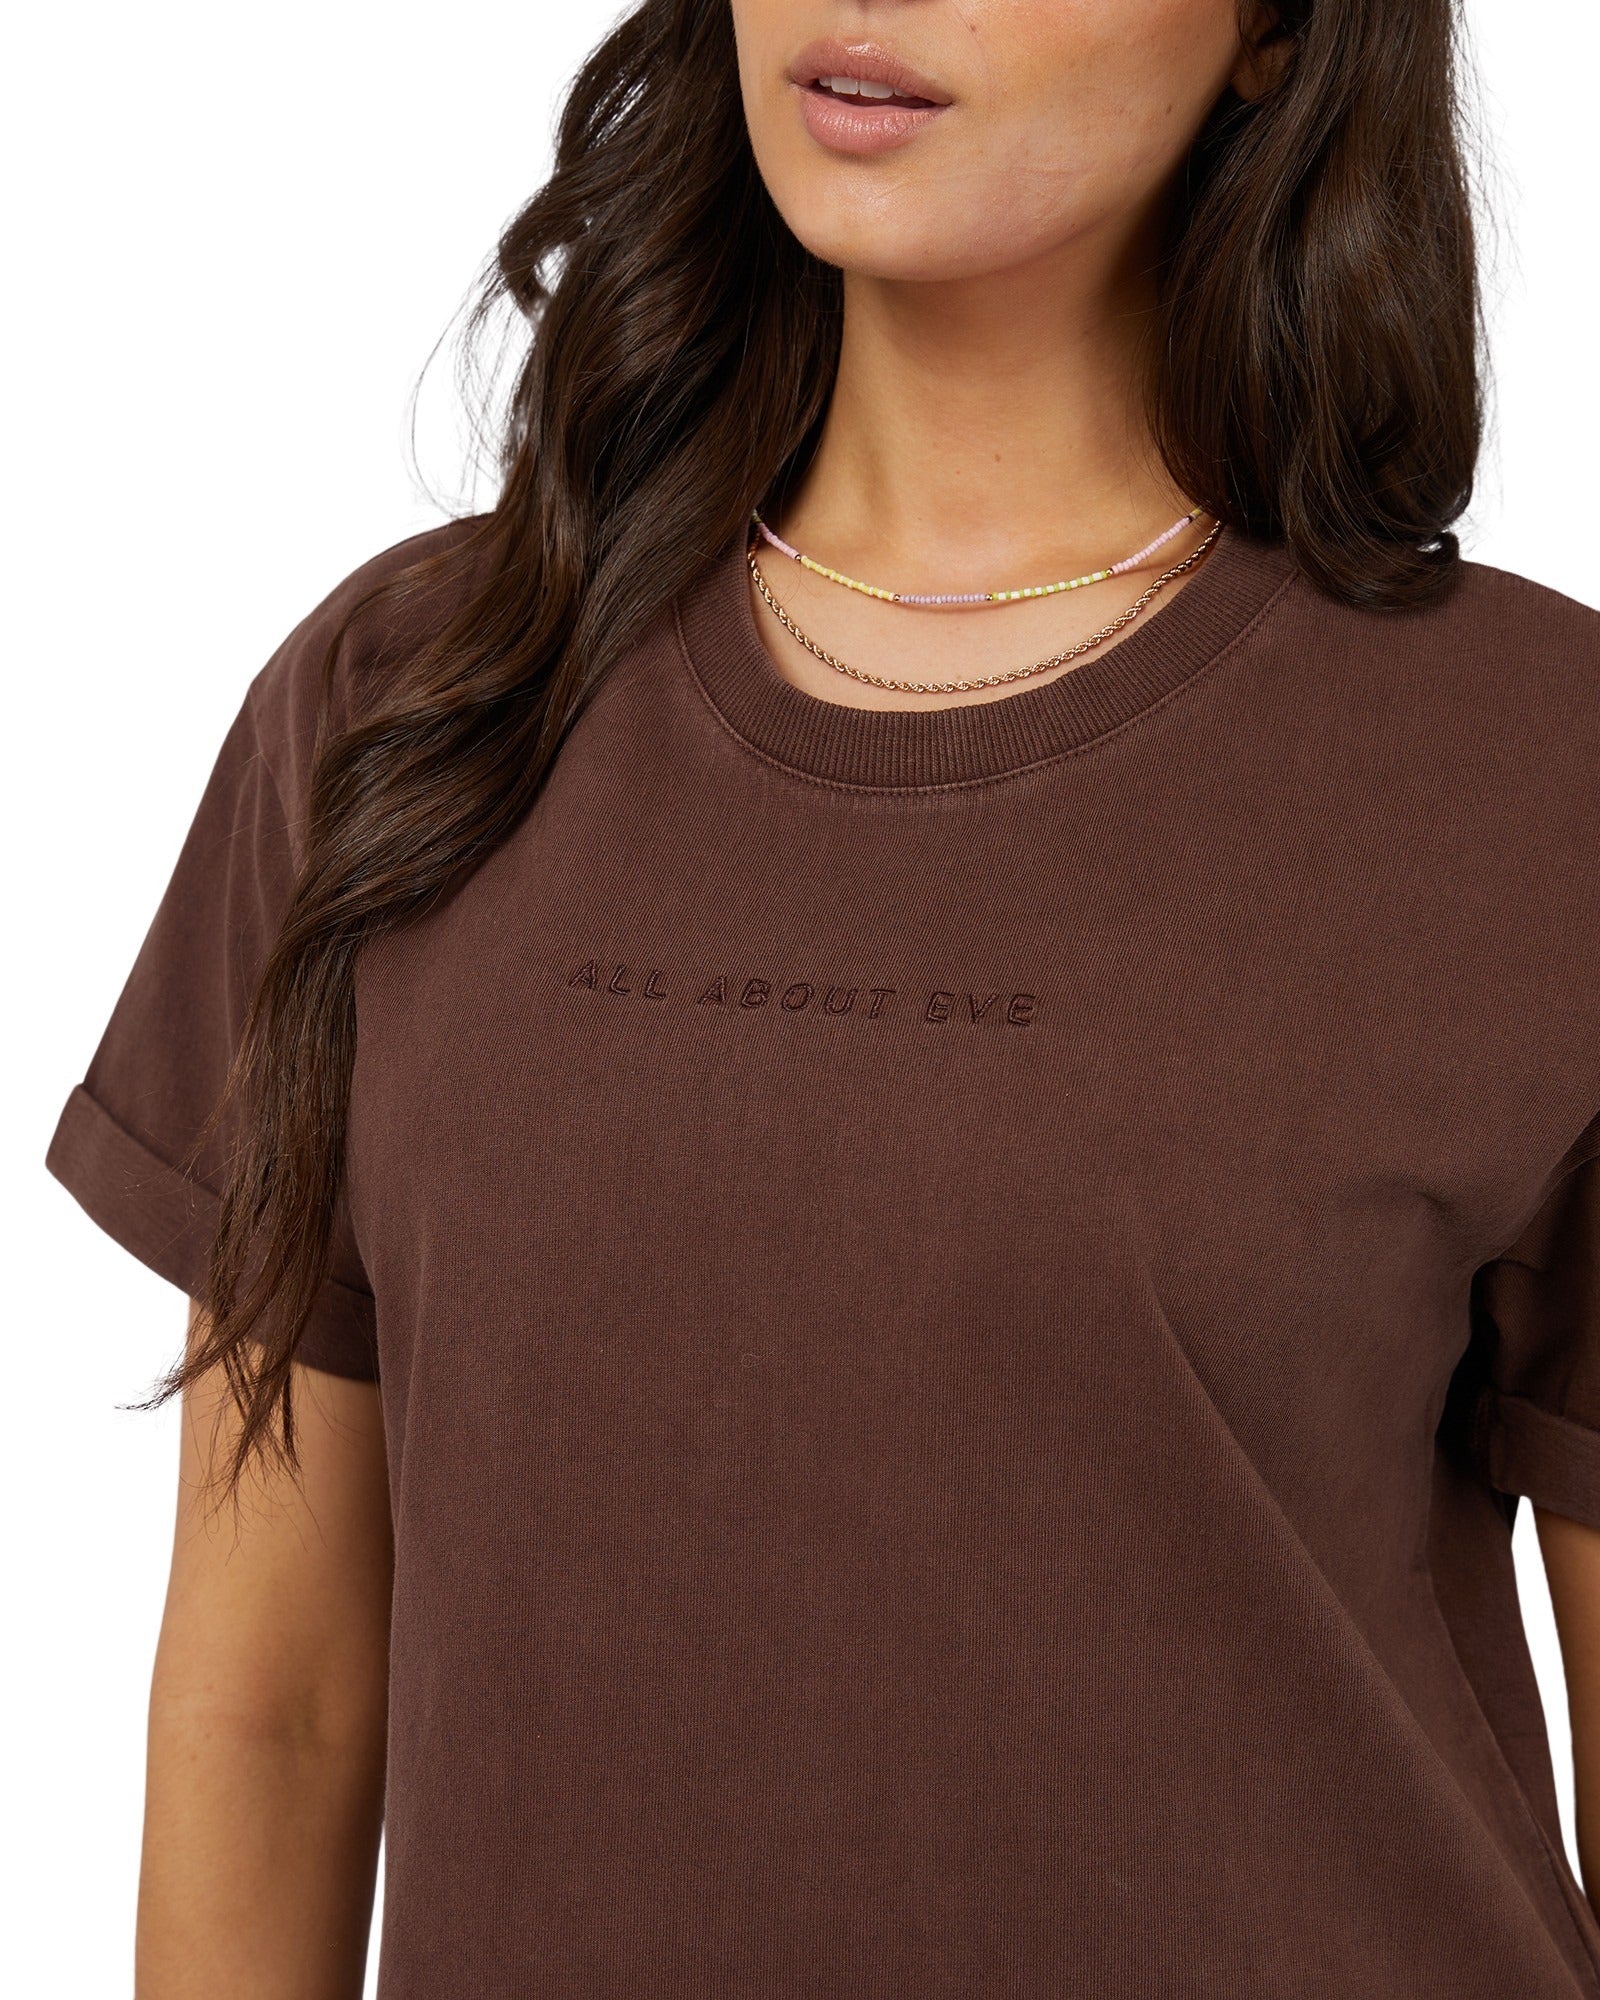 All About Eve - Washed Tee - Brown